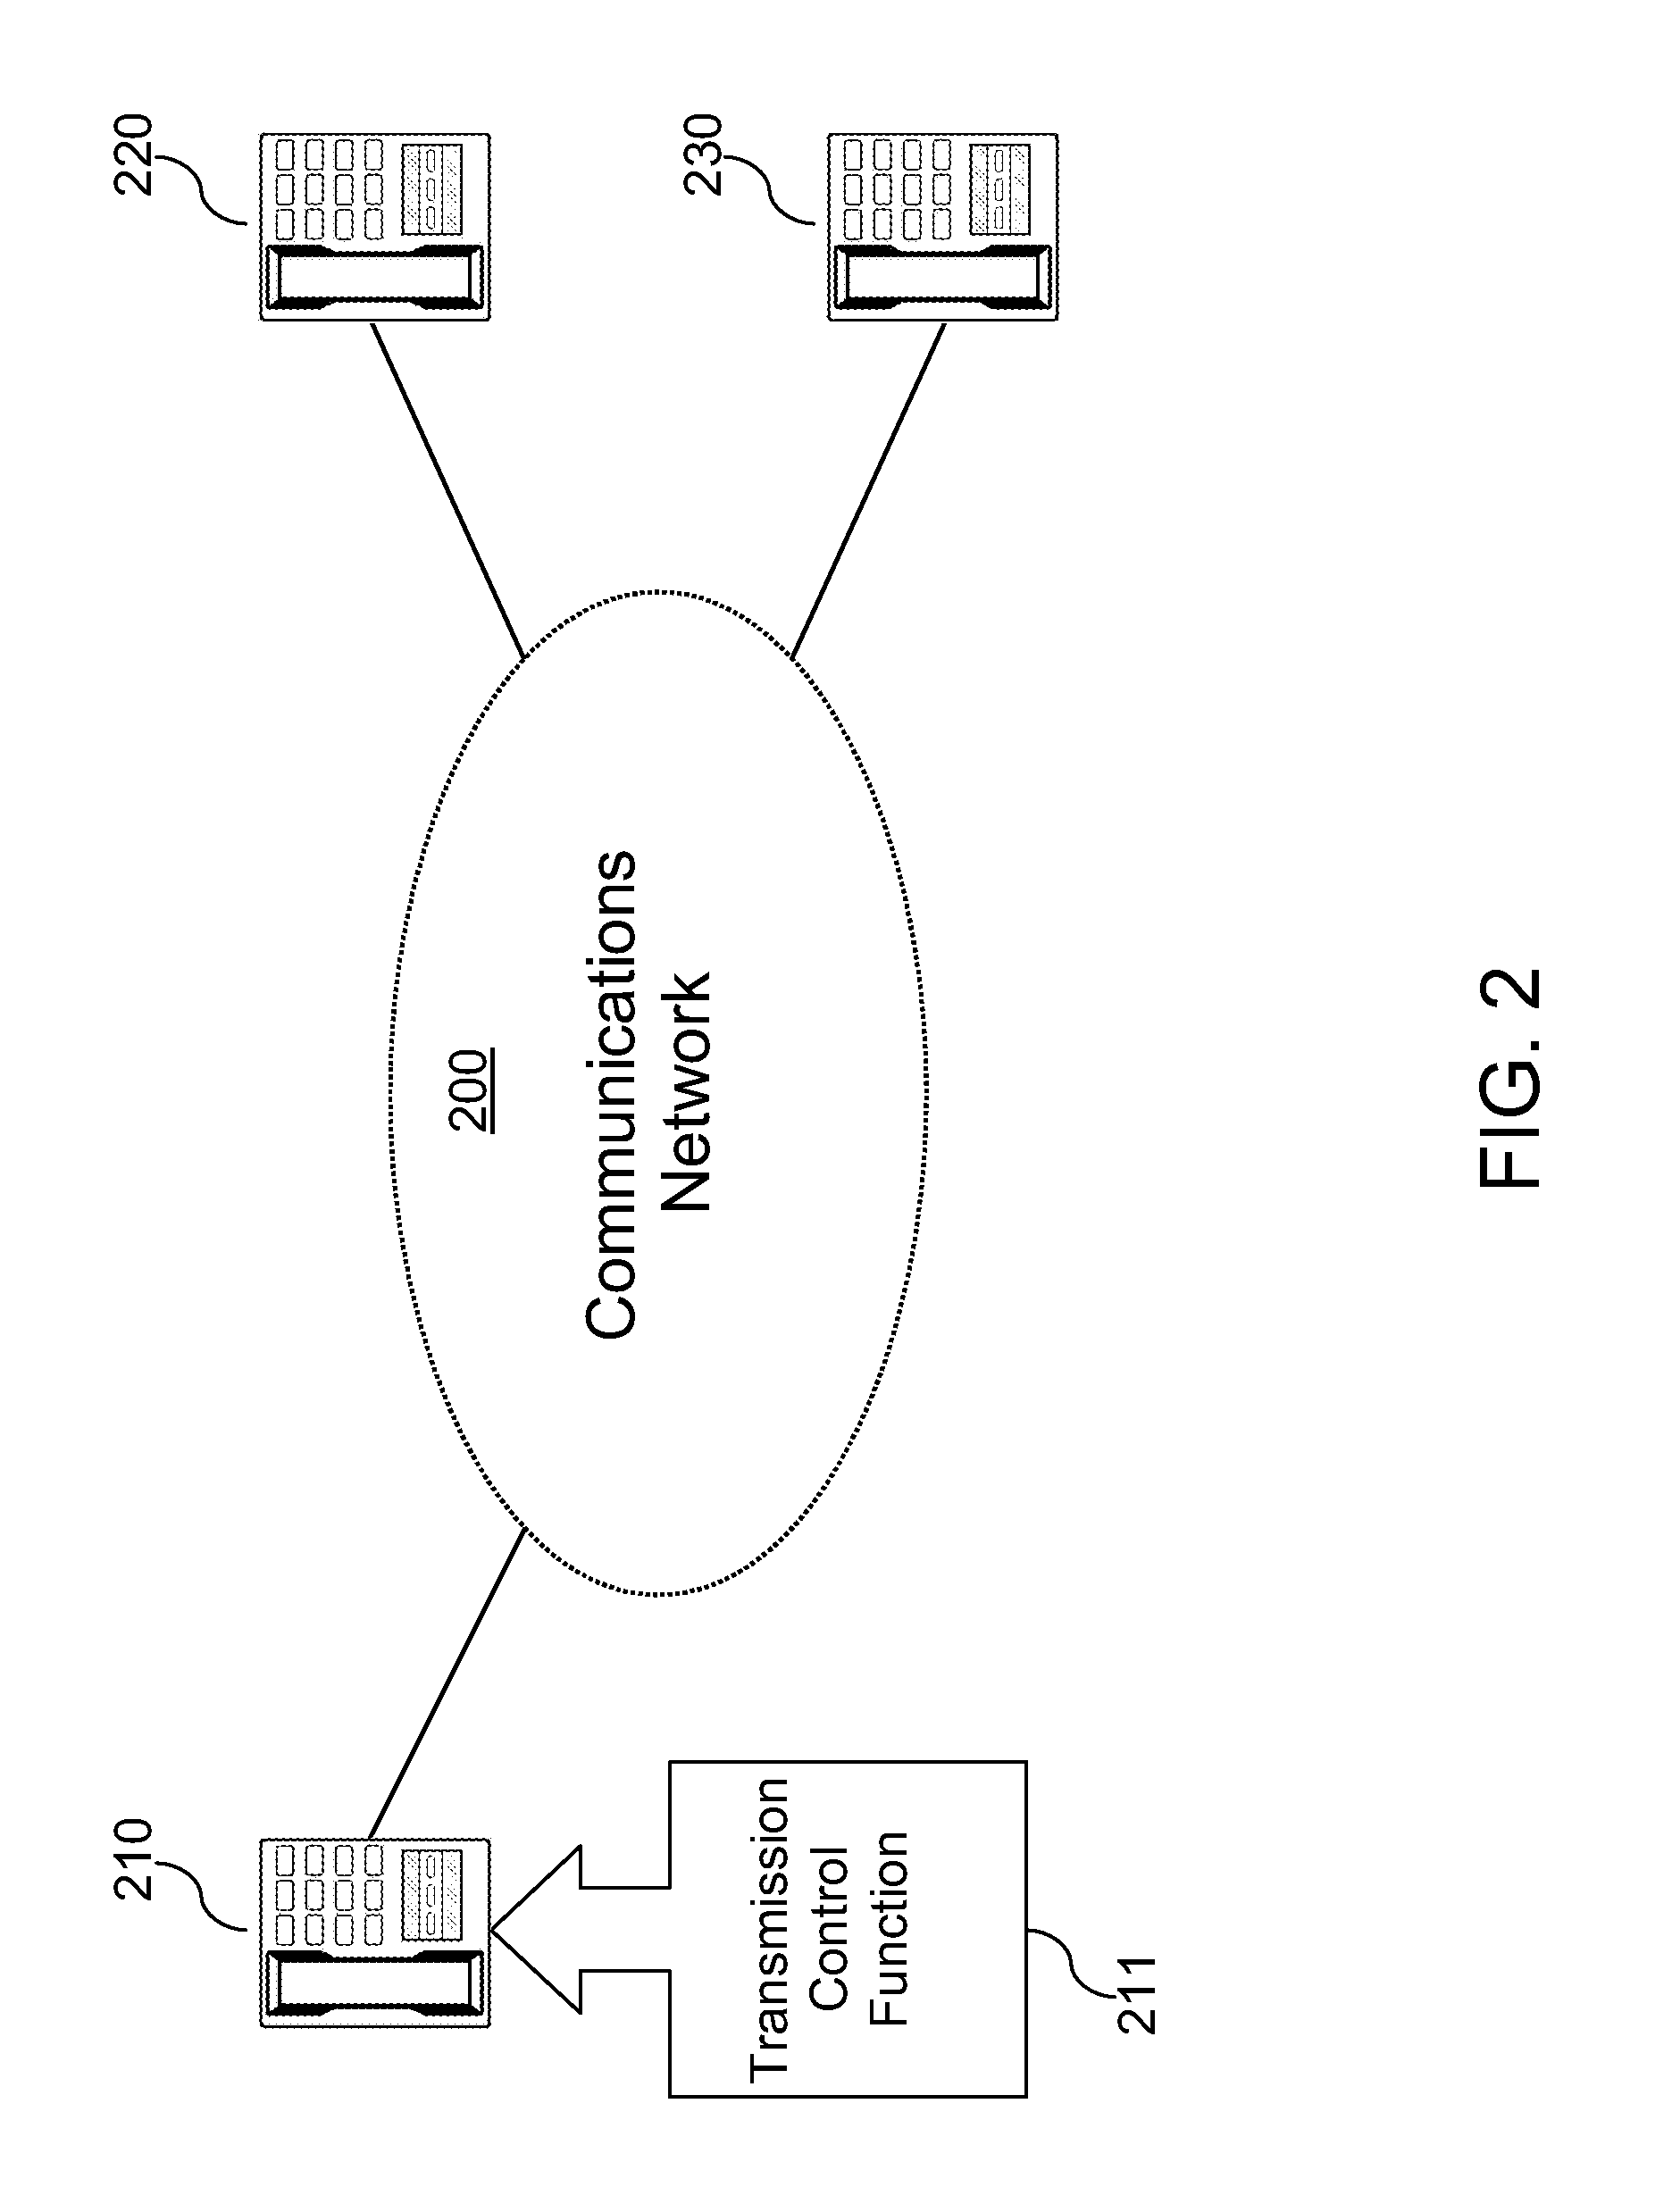 State-based Communication Station Control System and Method